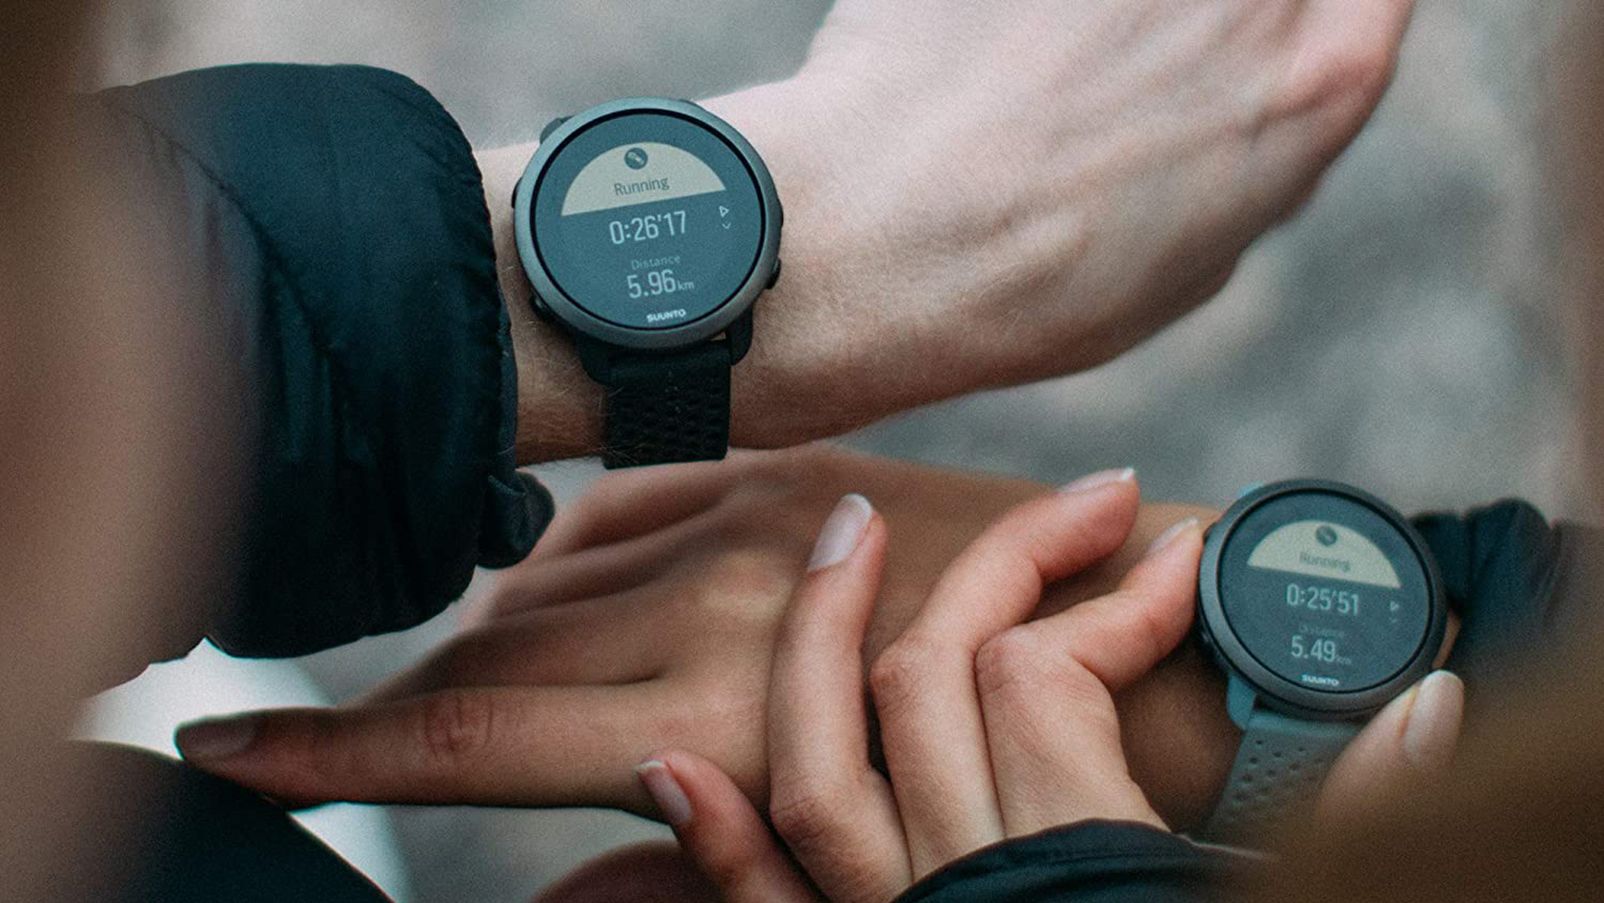 Garmin Forerunner 55 review: Solid health & fitness smartwatch for runners